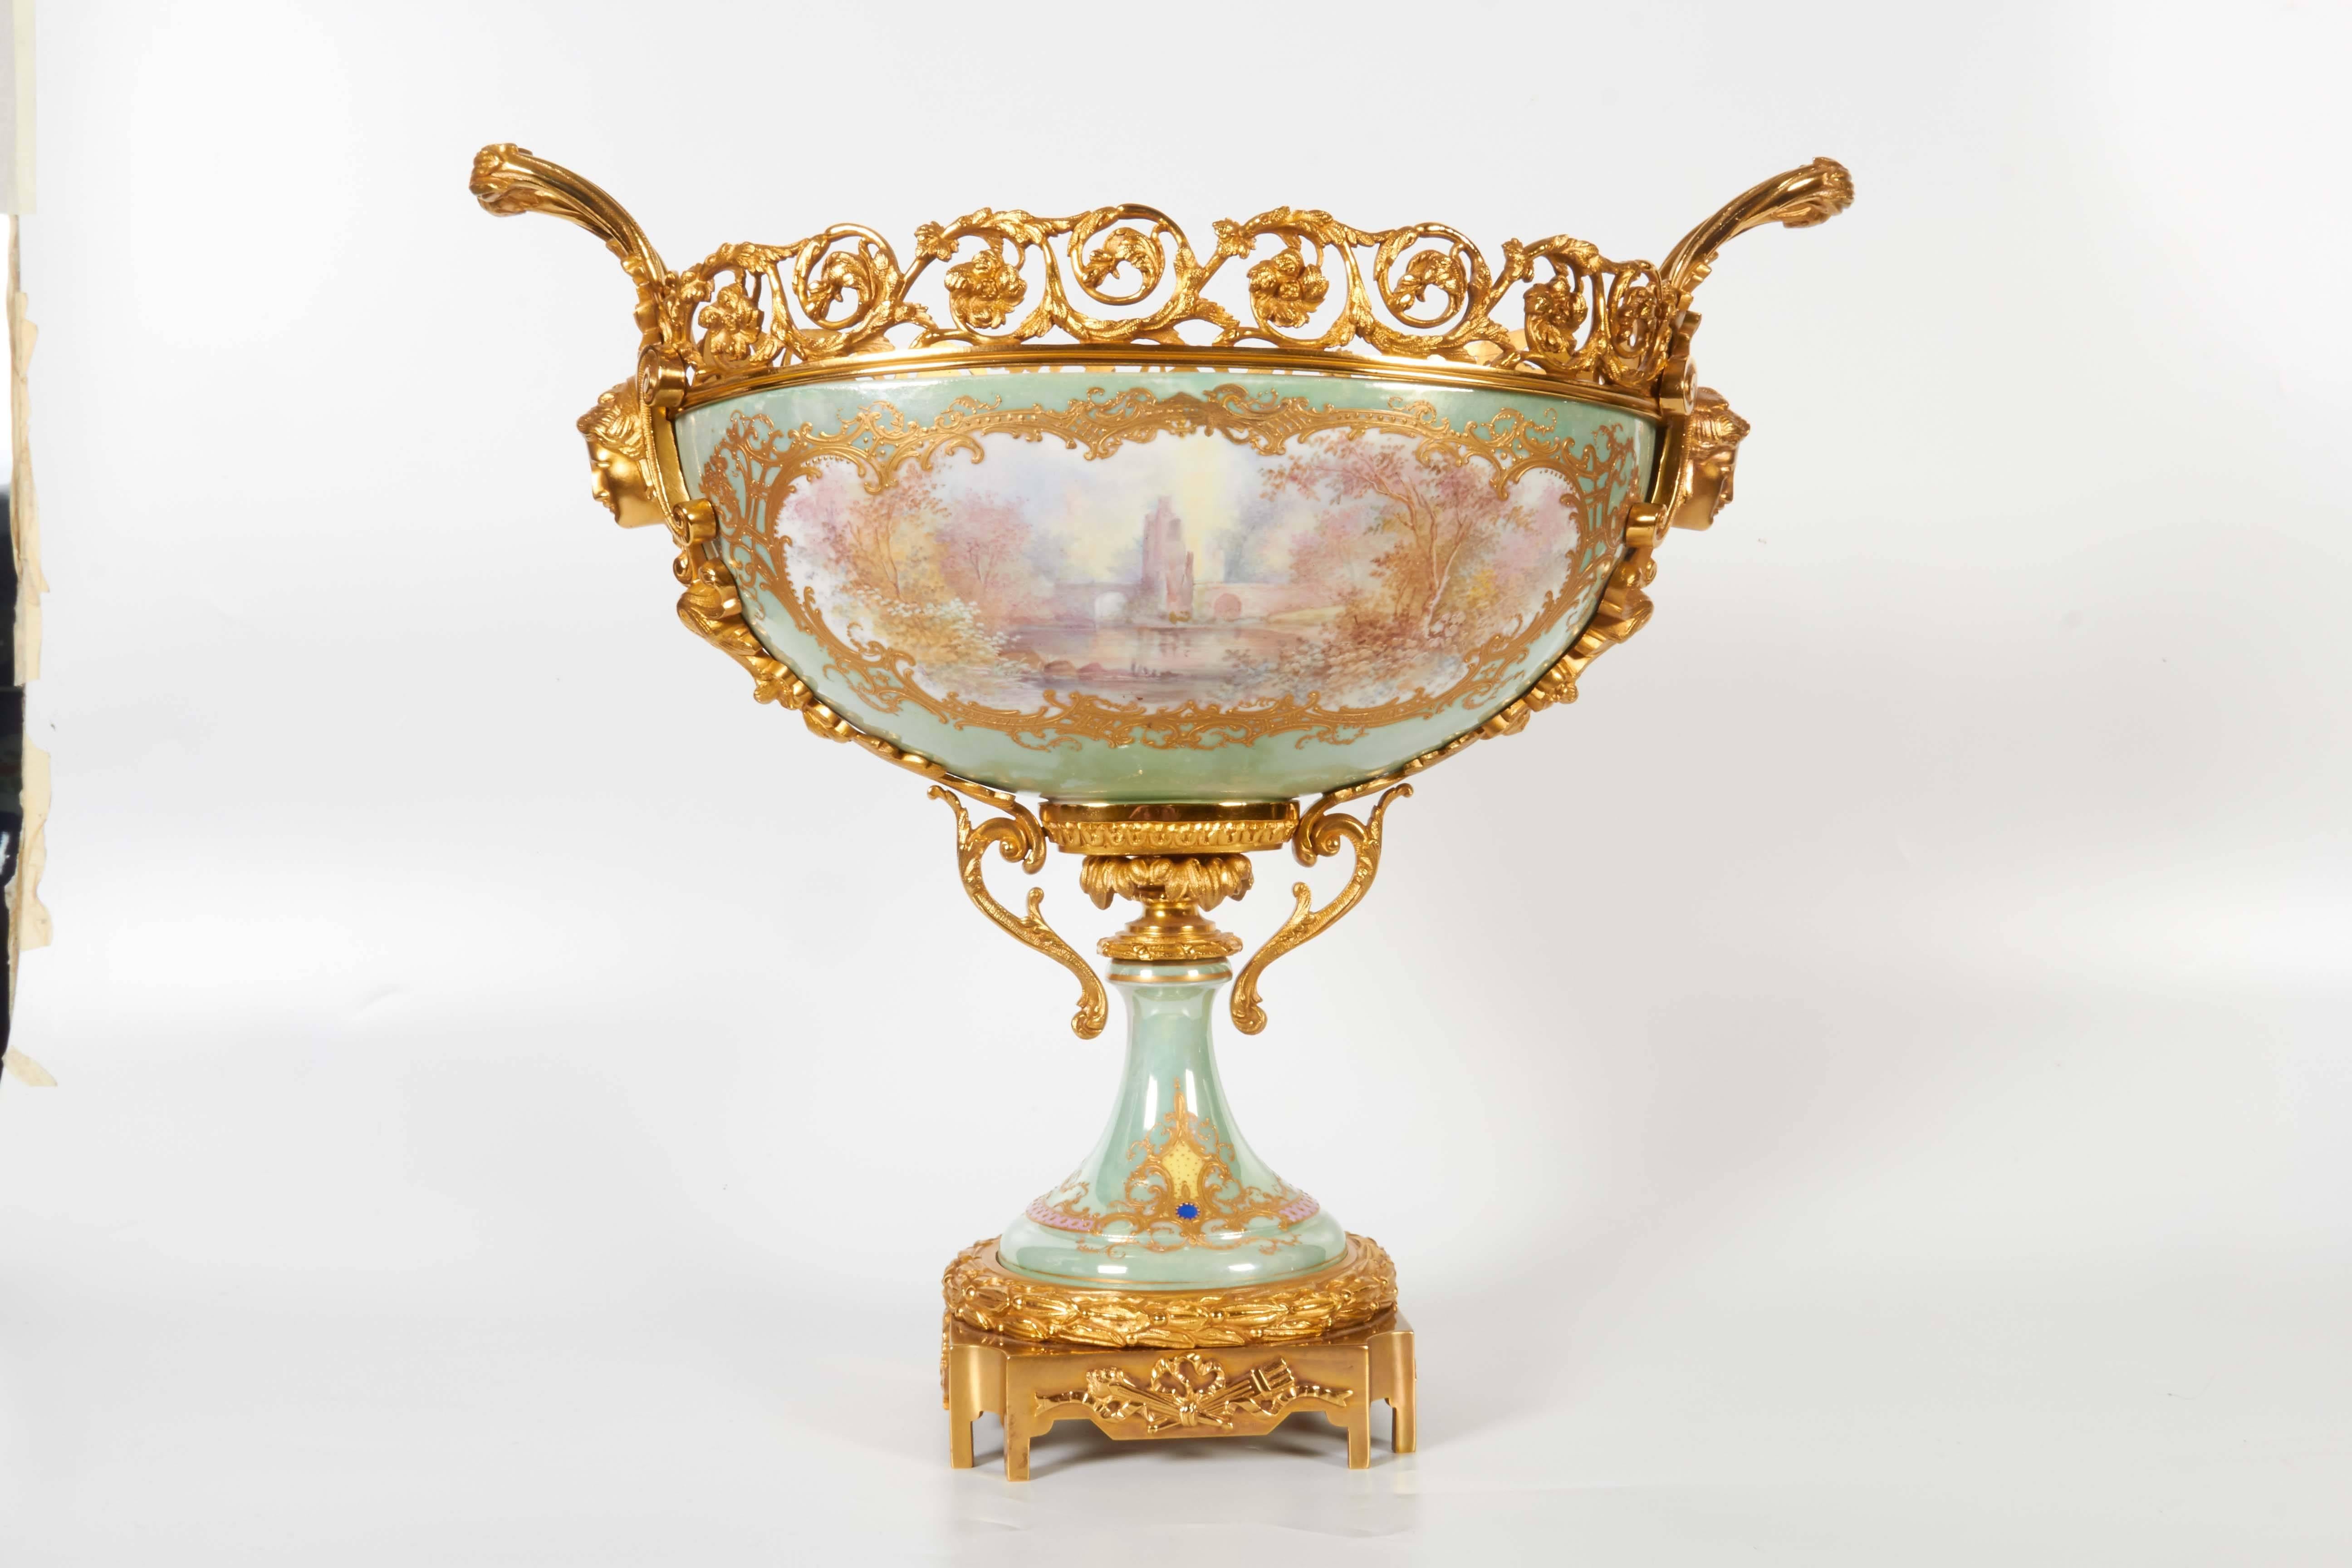 Bronze French Sèvres Porcelain & Ormolu-Mounted Hand-Painted Oval Centerpiece/Jardenier For Sale